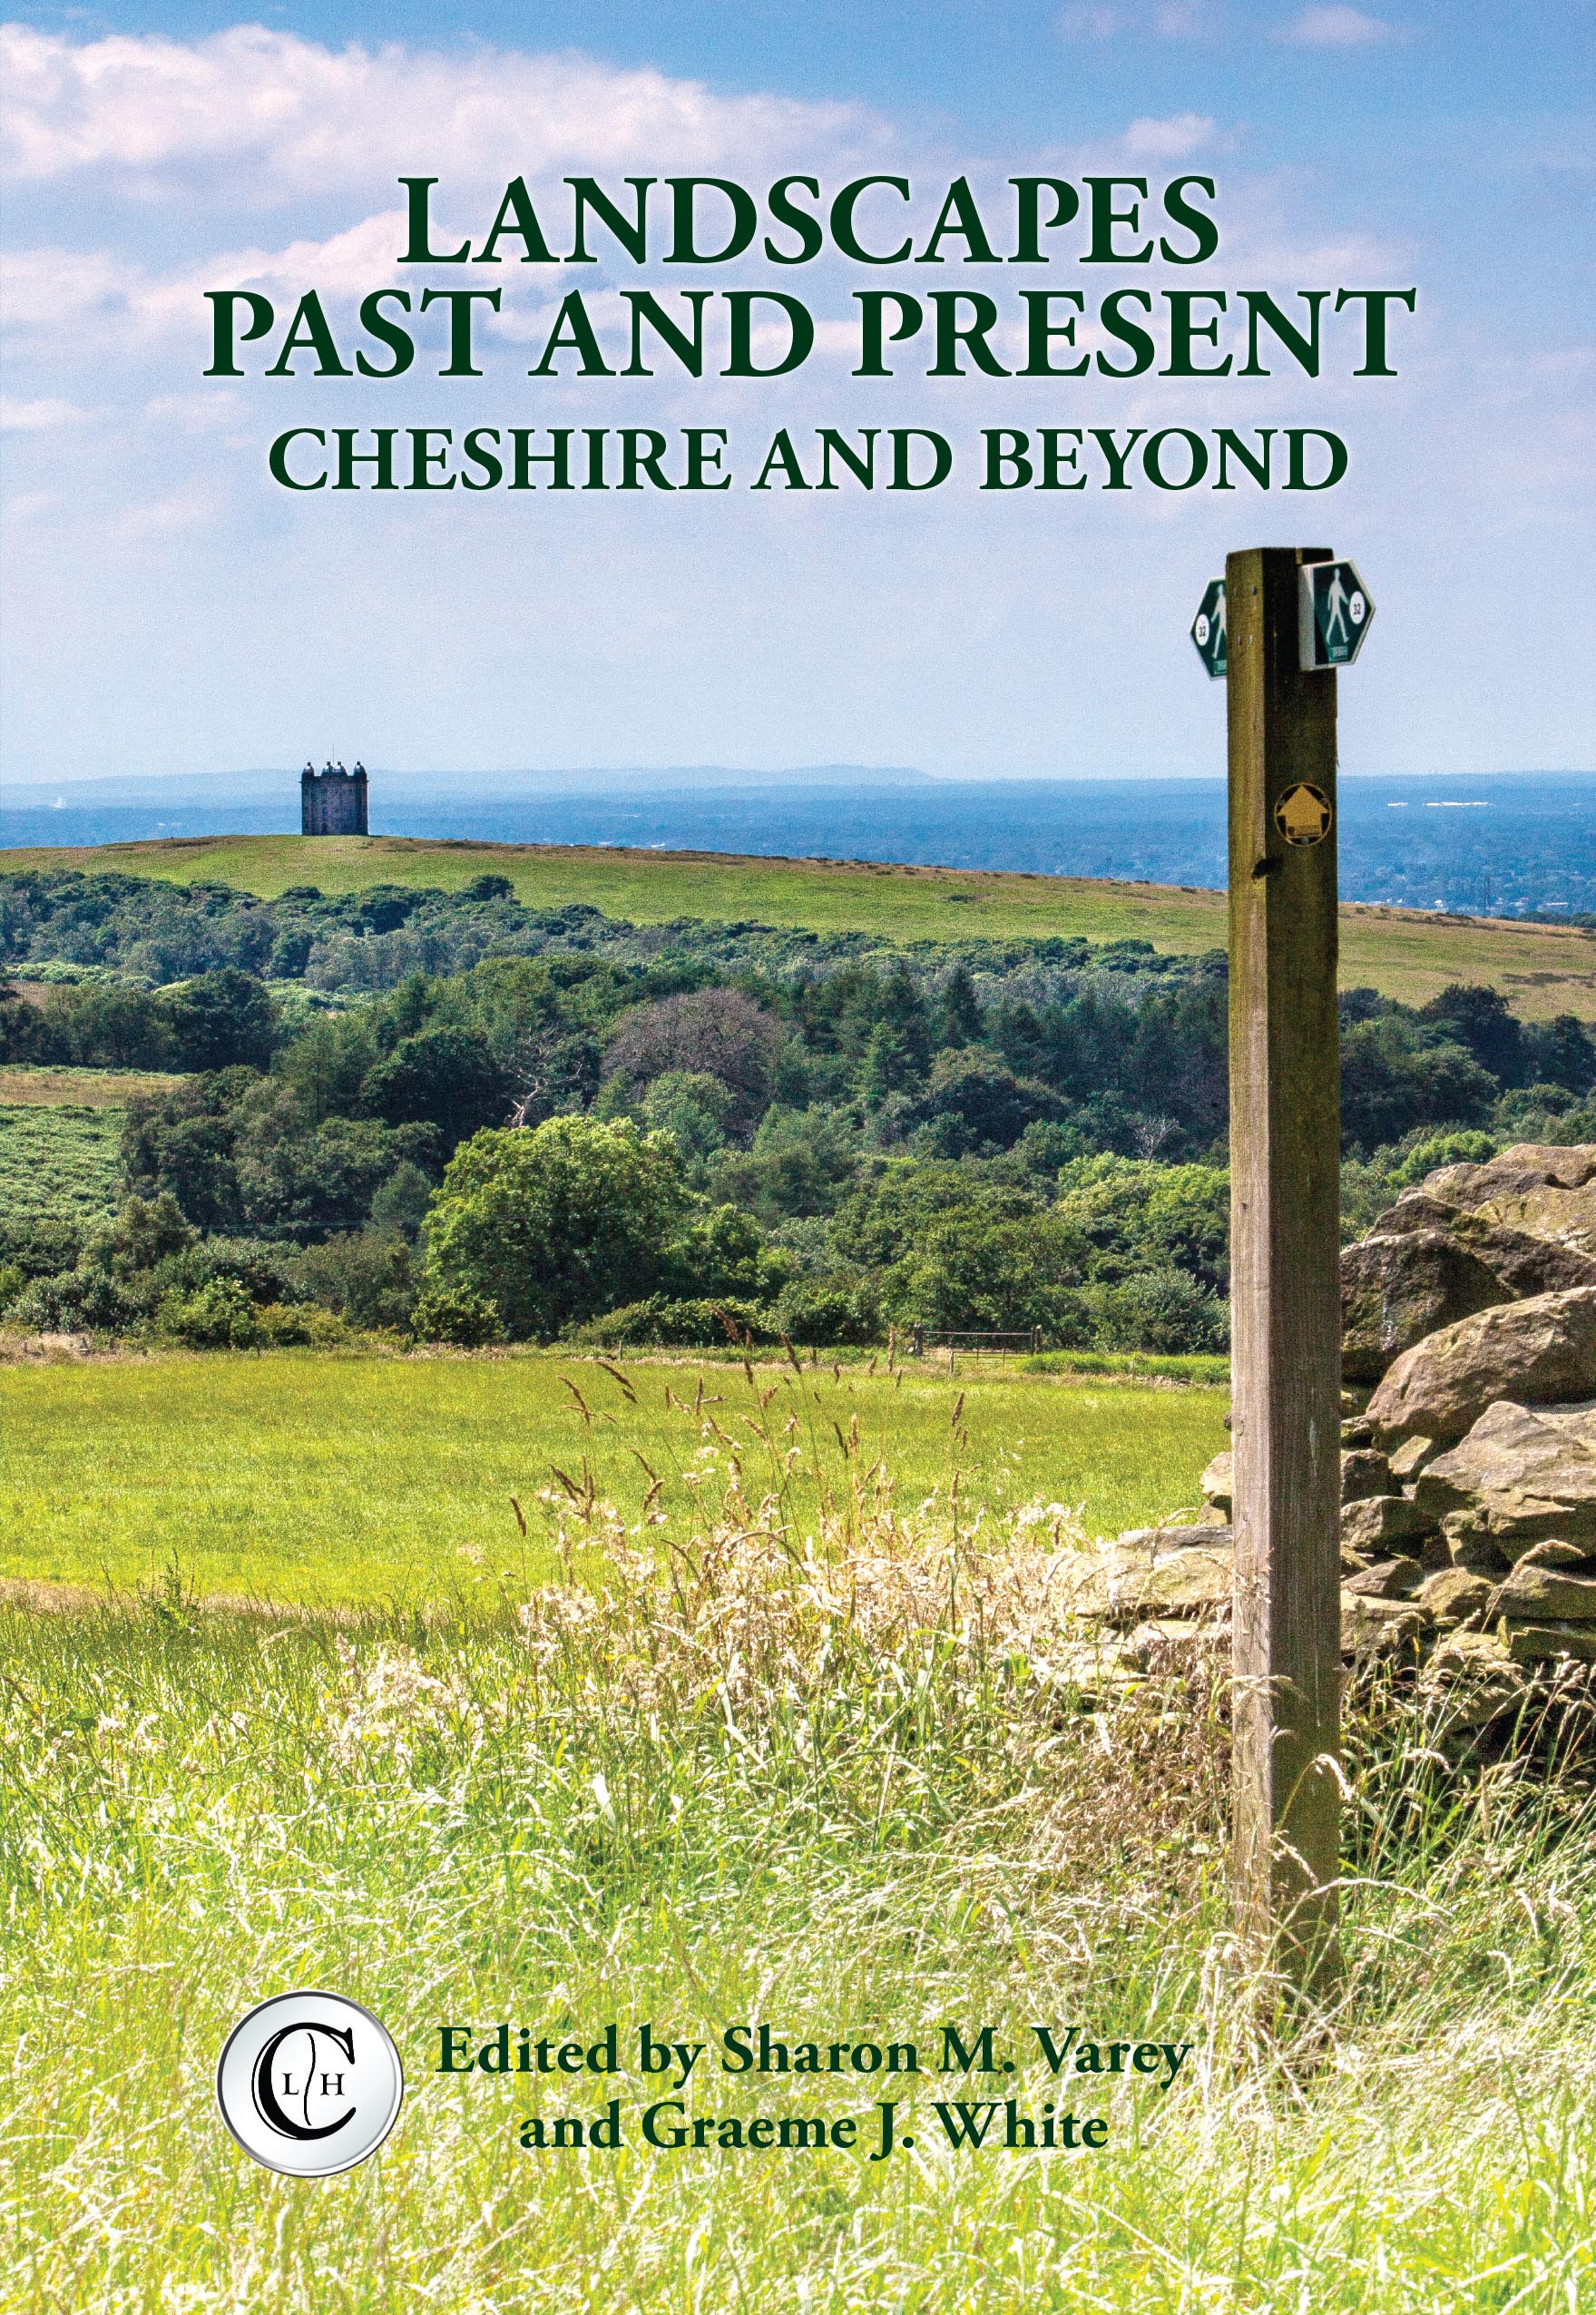 Landscapes Past and Present Cheshire and Beyond